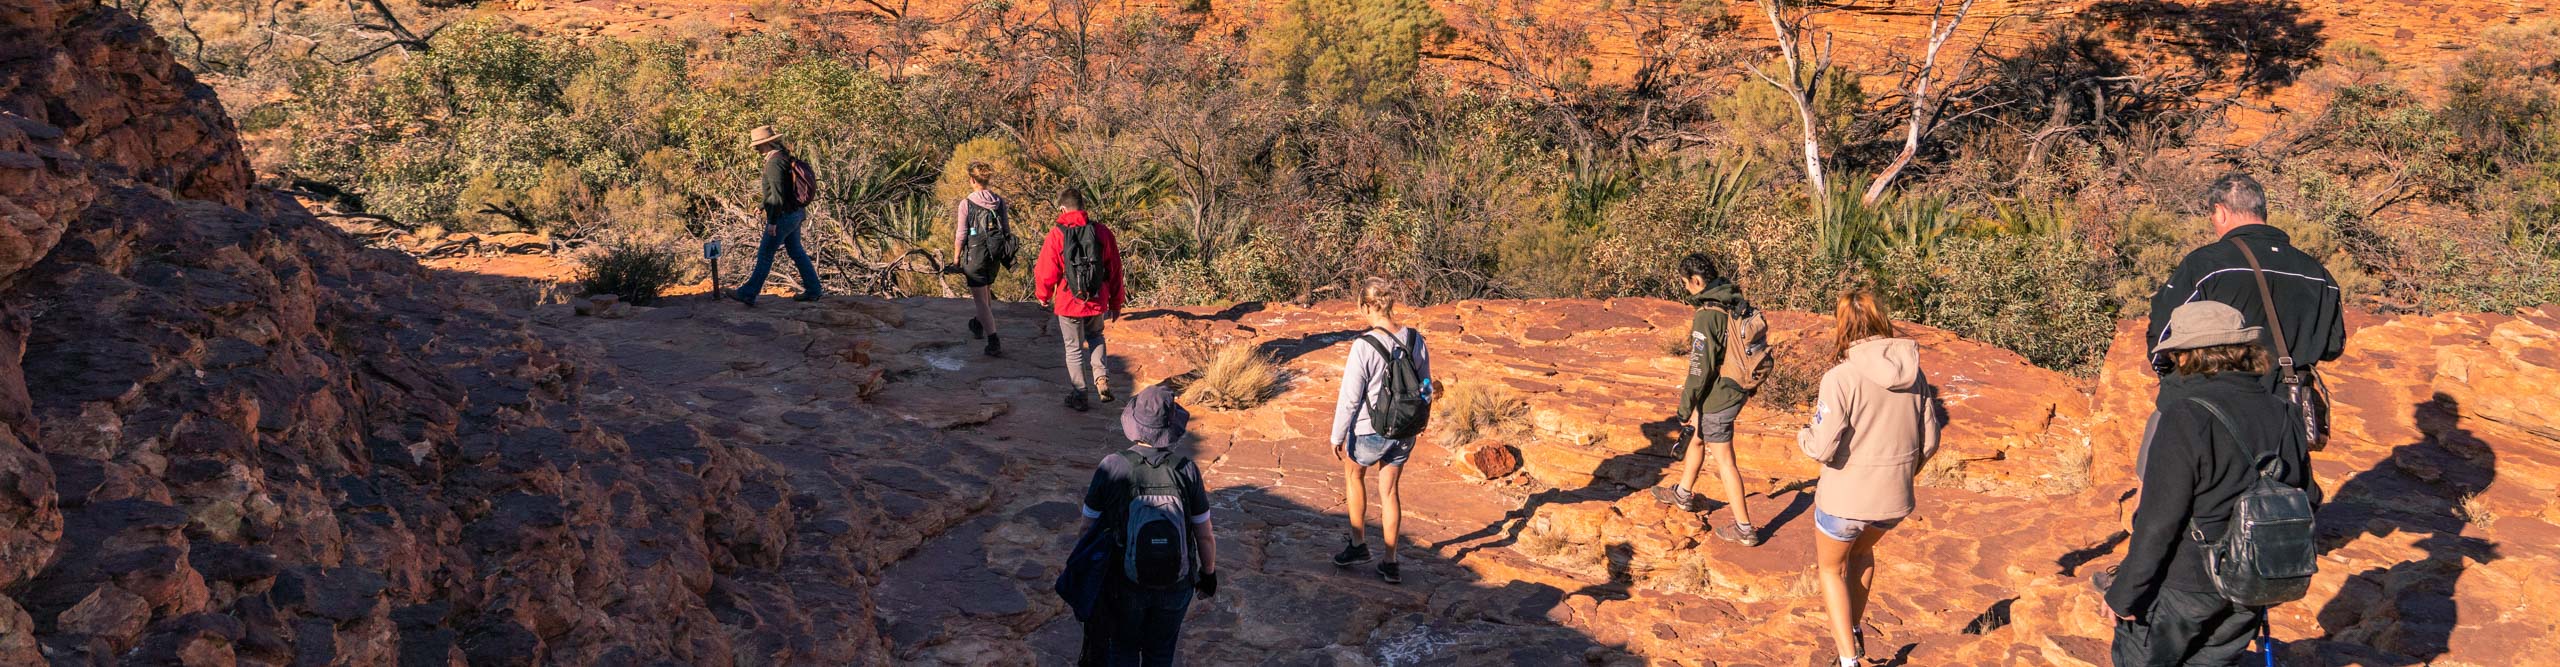 Group hiking in the Kings Canyon on a sunny day, in the Northern Territory, Australia 